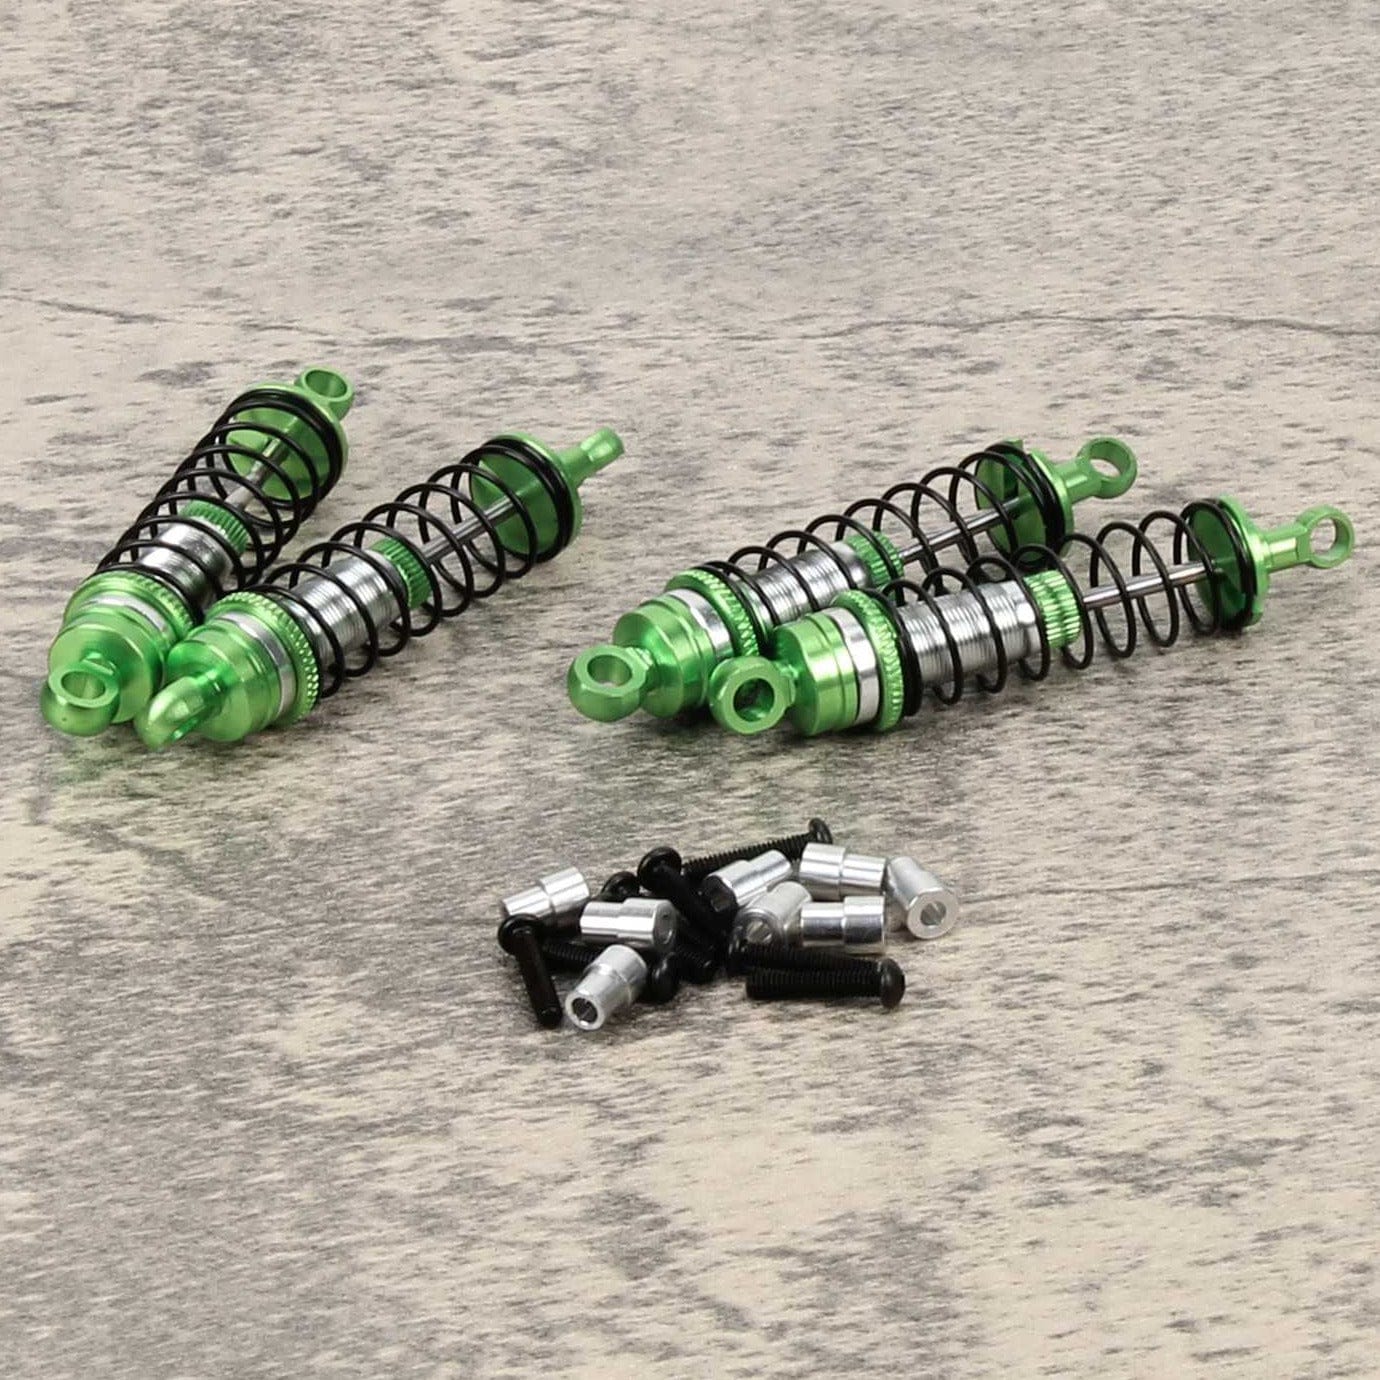 RCAWD Traxxas Latrax Green / Two Set RCAWD Oil-filled Assembled with Springs Shocks 2pcs for 1/18 Traxxas Latrax Upgrades